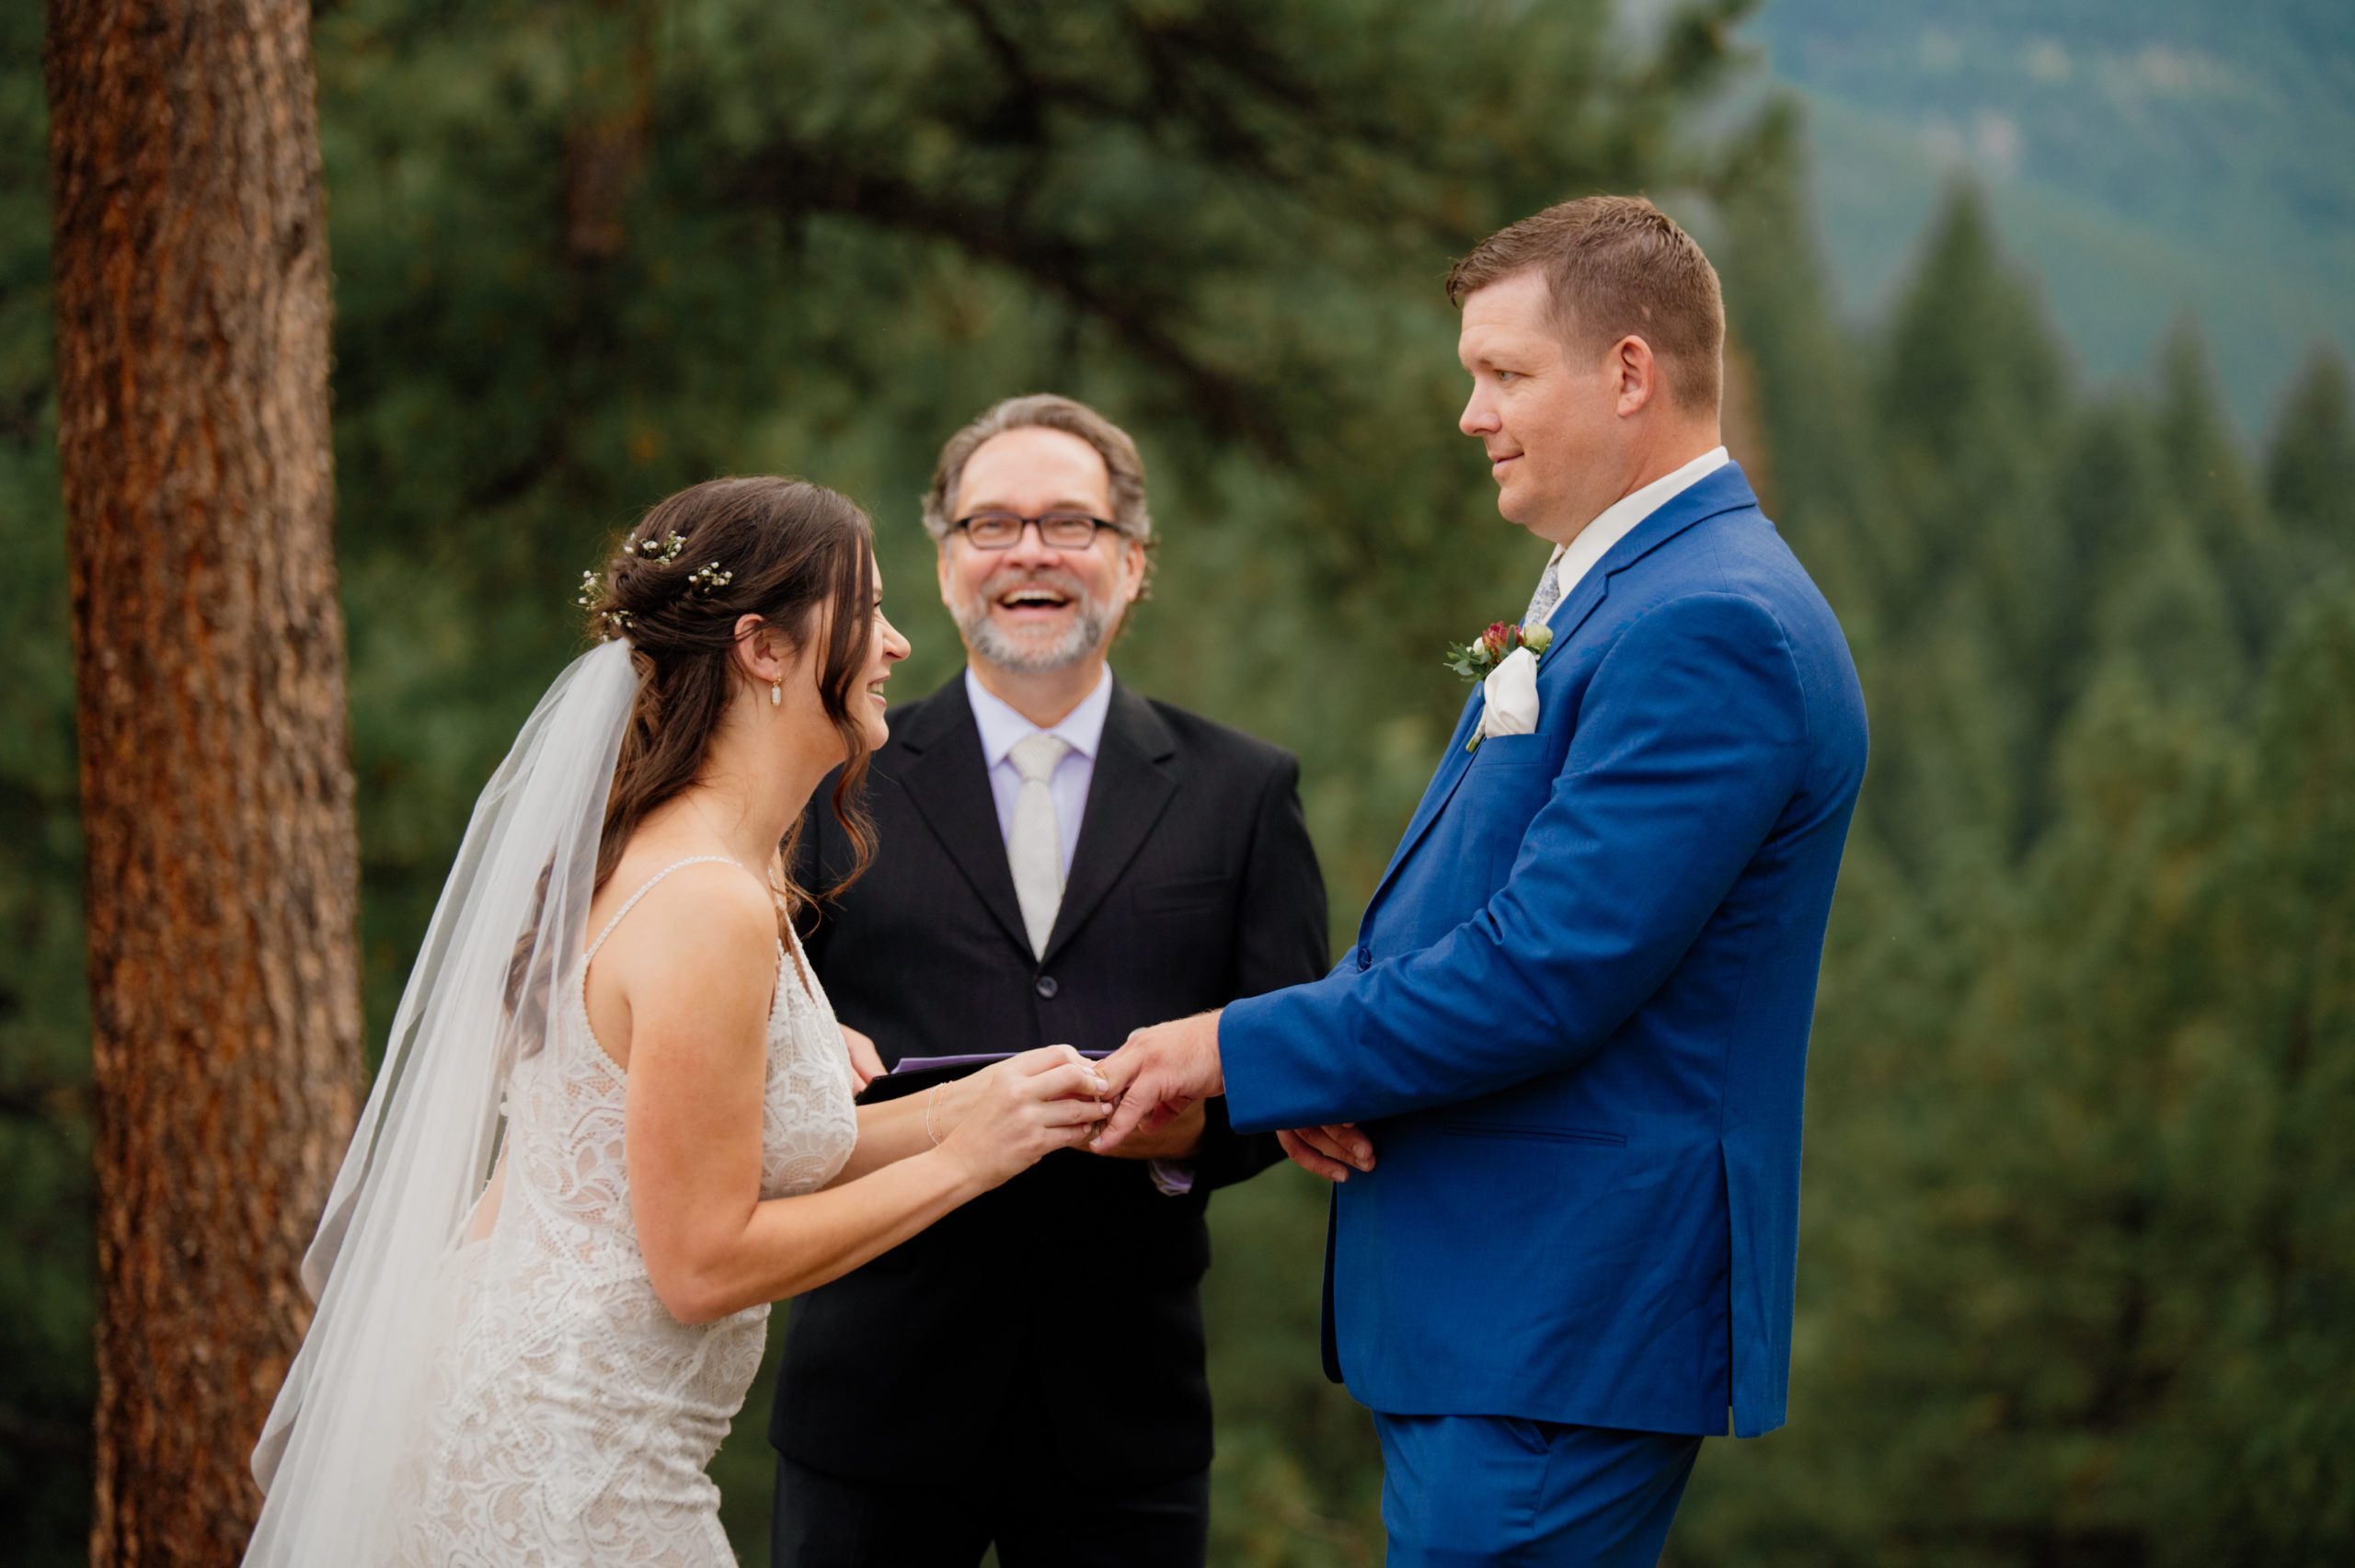 The bride places a ring on her grooms hand during their artist point elopement ceremony.